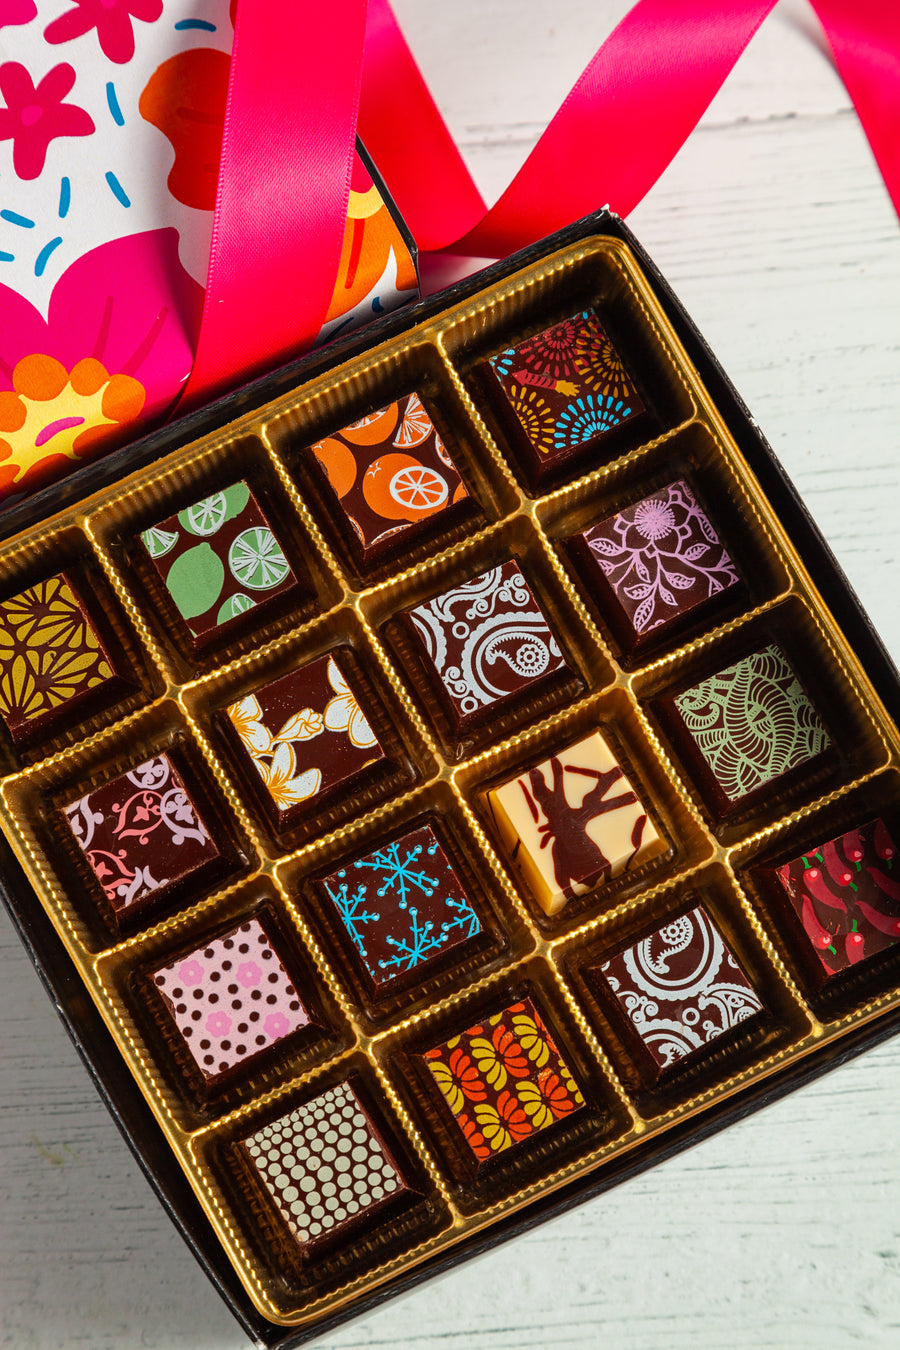 Mother's Day Single Queen Chocolate Art Box (16 Pieces)